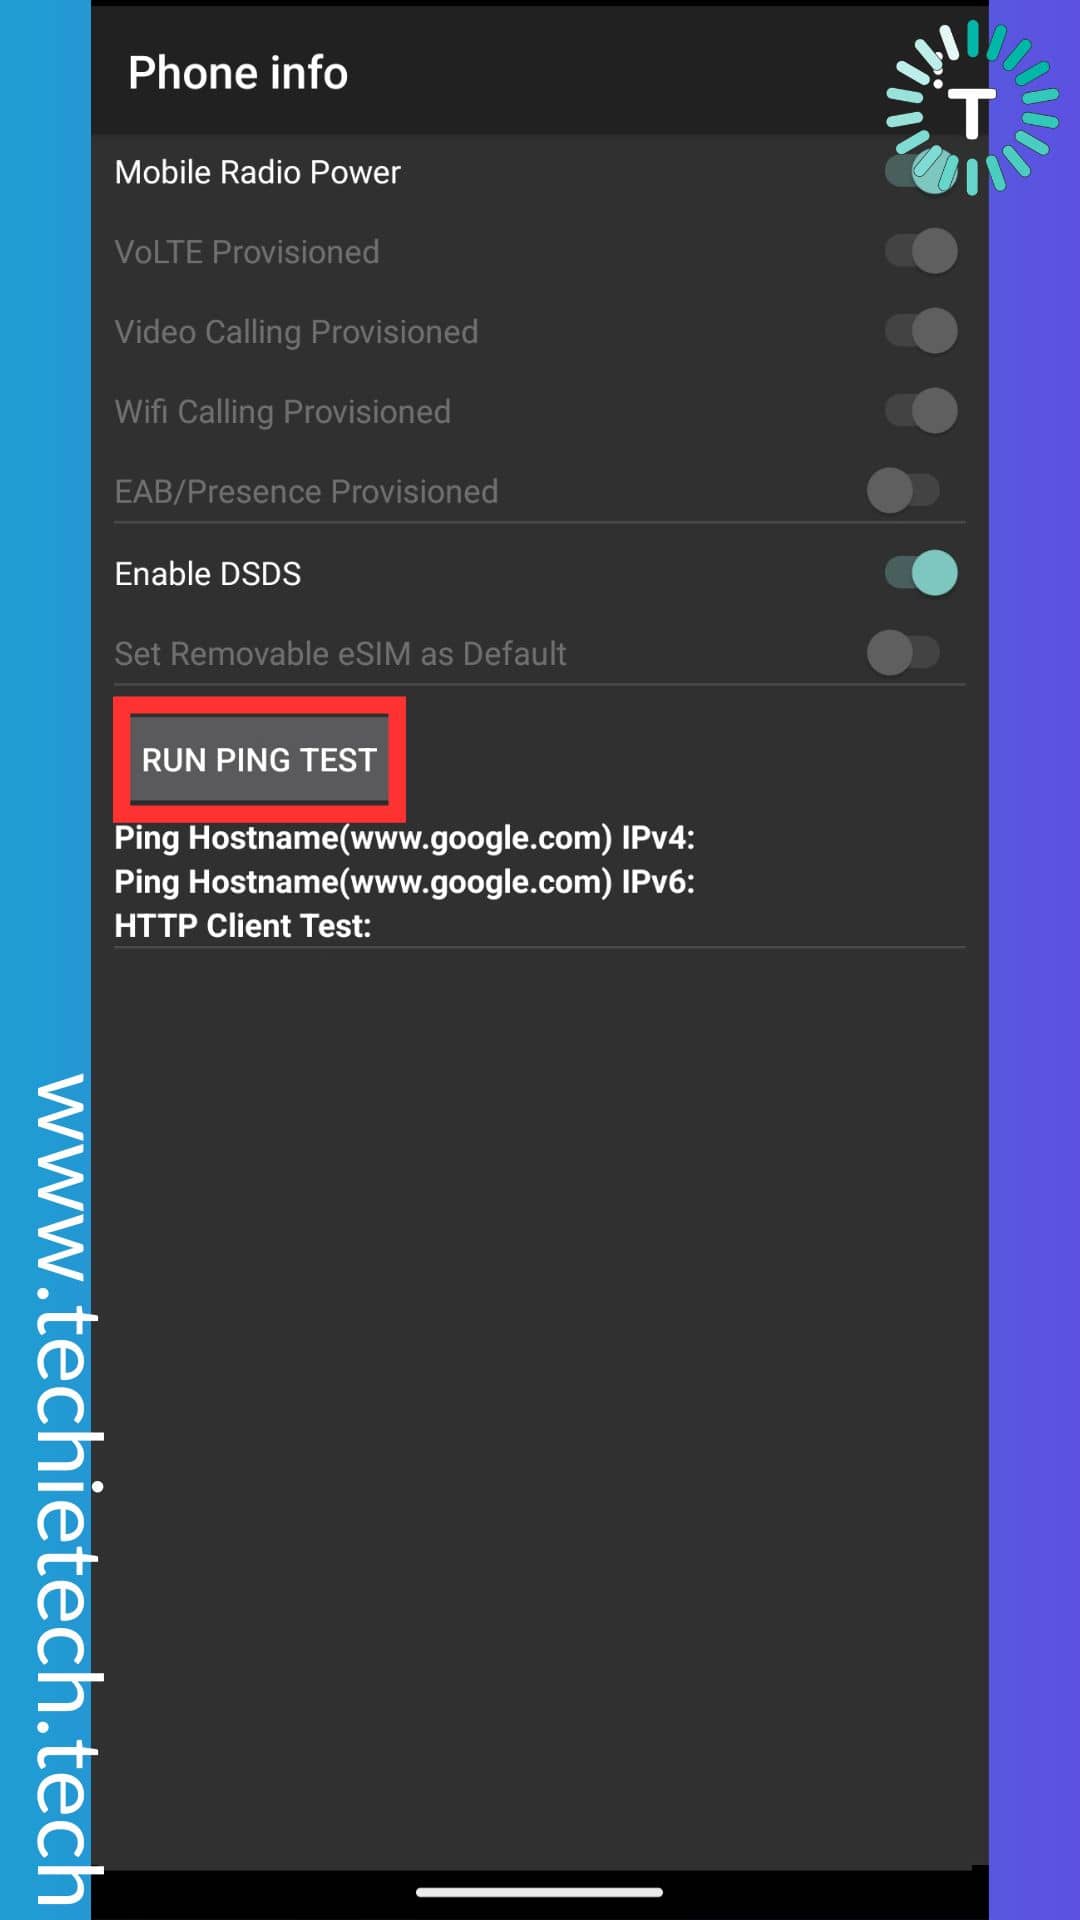 scroll down and tap on the RUN PING TEST,